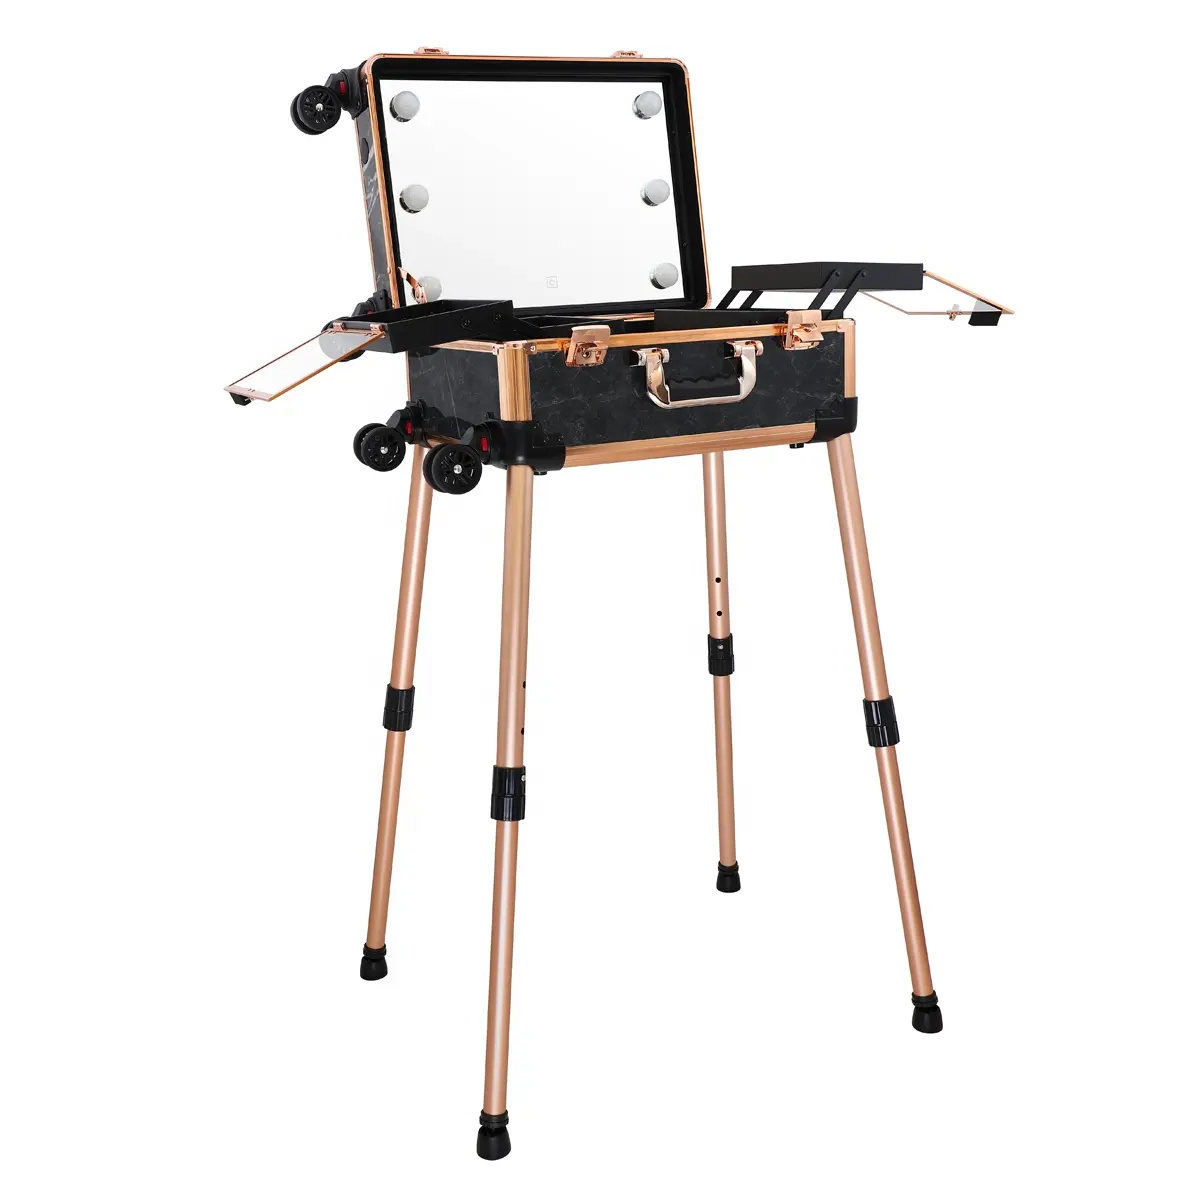 Keyson professional customized black marble pattern mobile aluminum studio makeup trolley case with lights and legs